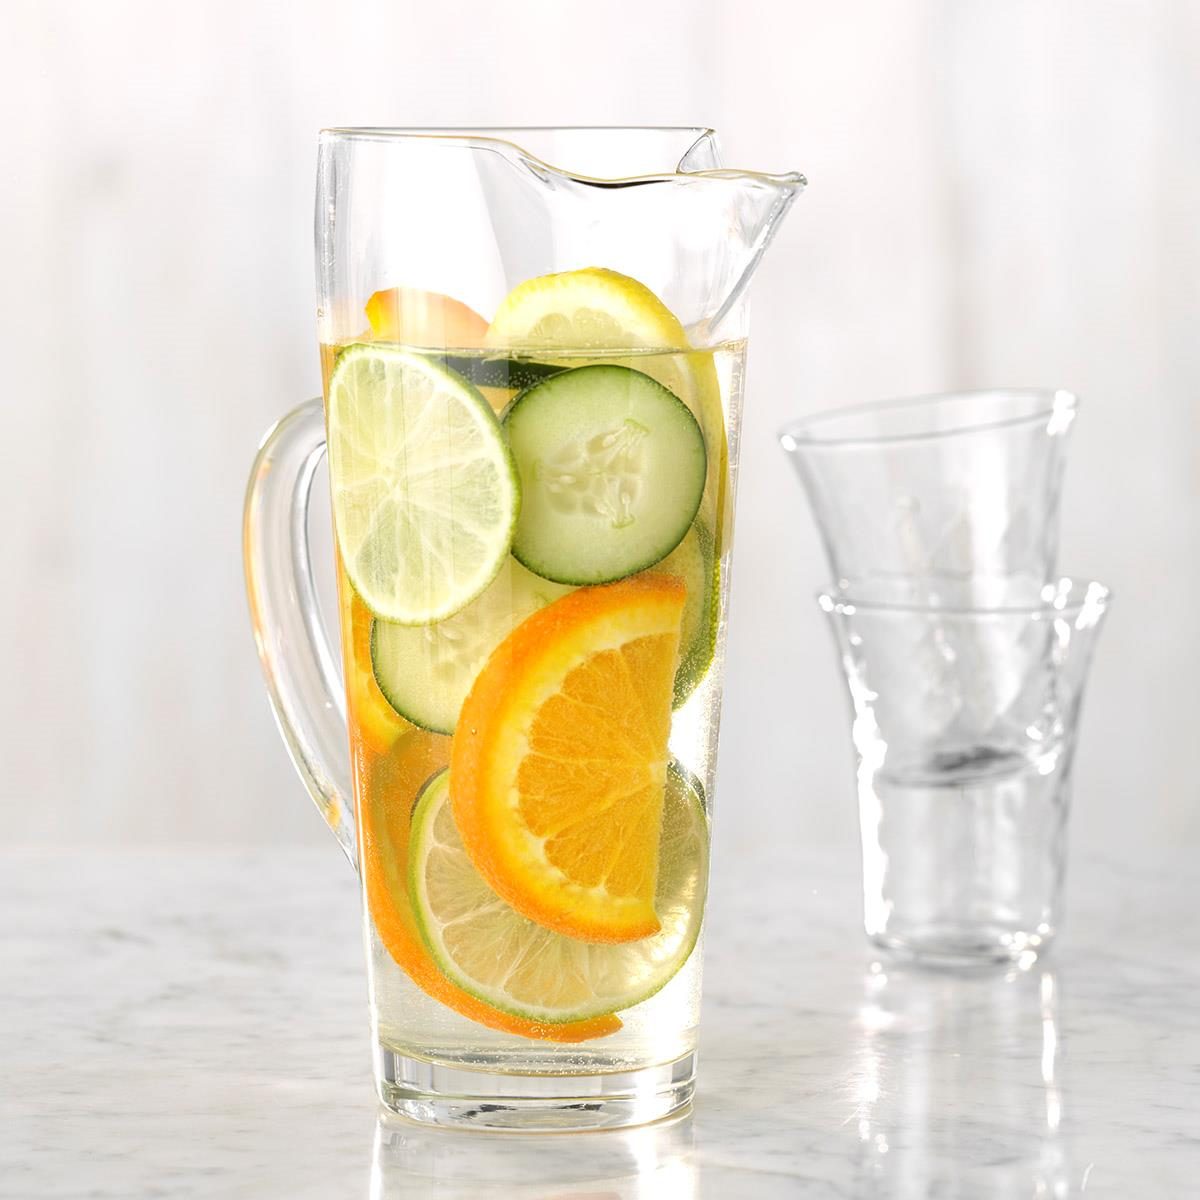 https://www.tasteofhome.com/wp-content/uploads/2018/04/Citrus-and-Cucumber-Infused-Water_EXPS_JMZ18_224885_C03_07_6b-11.jpg?fit=700%2C1024